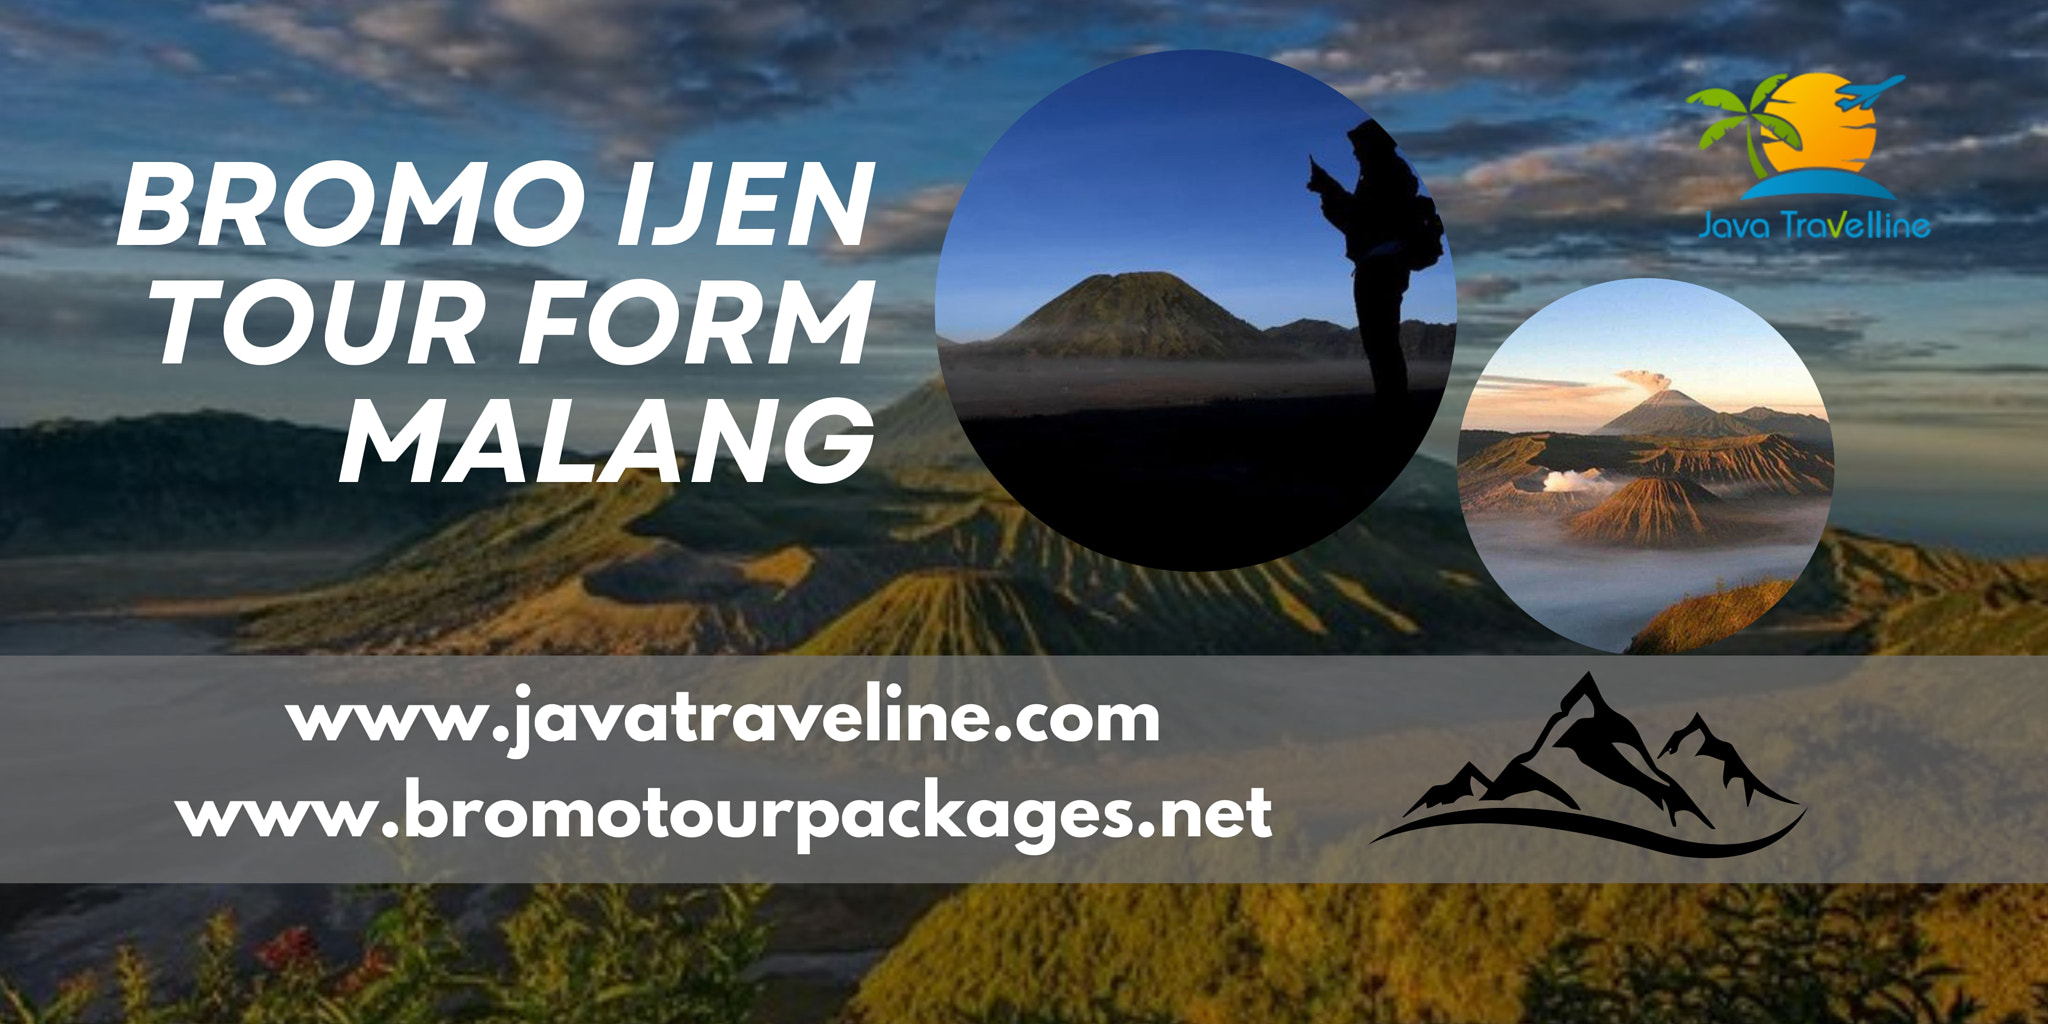 Bromo Ijen Tour from Malang, What you need to know about Bromo